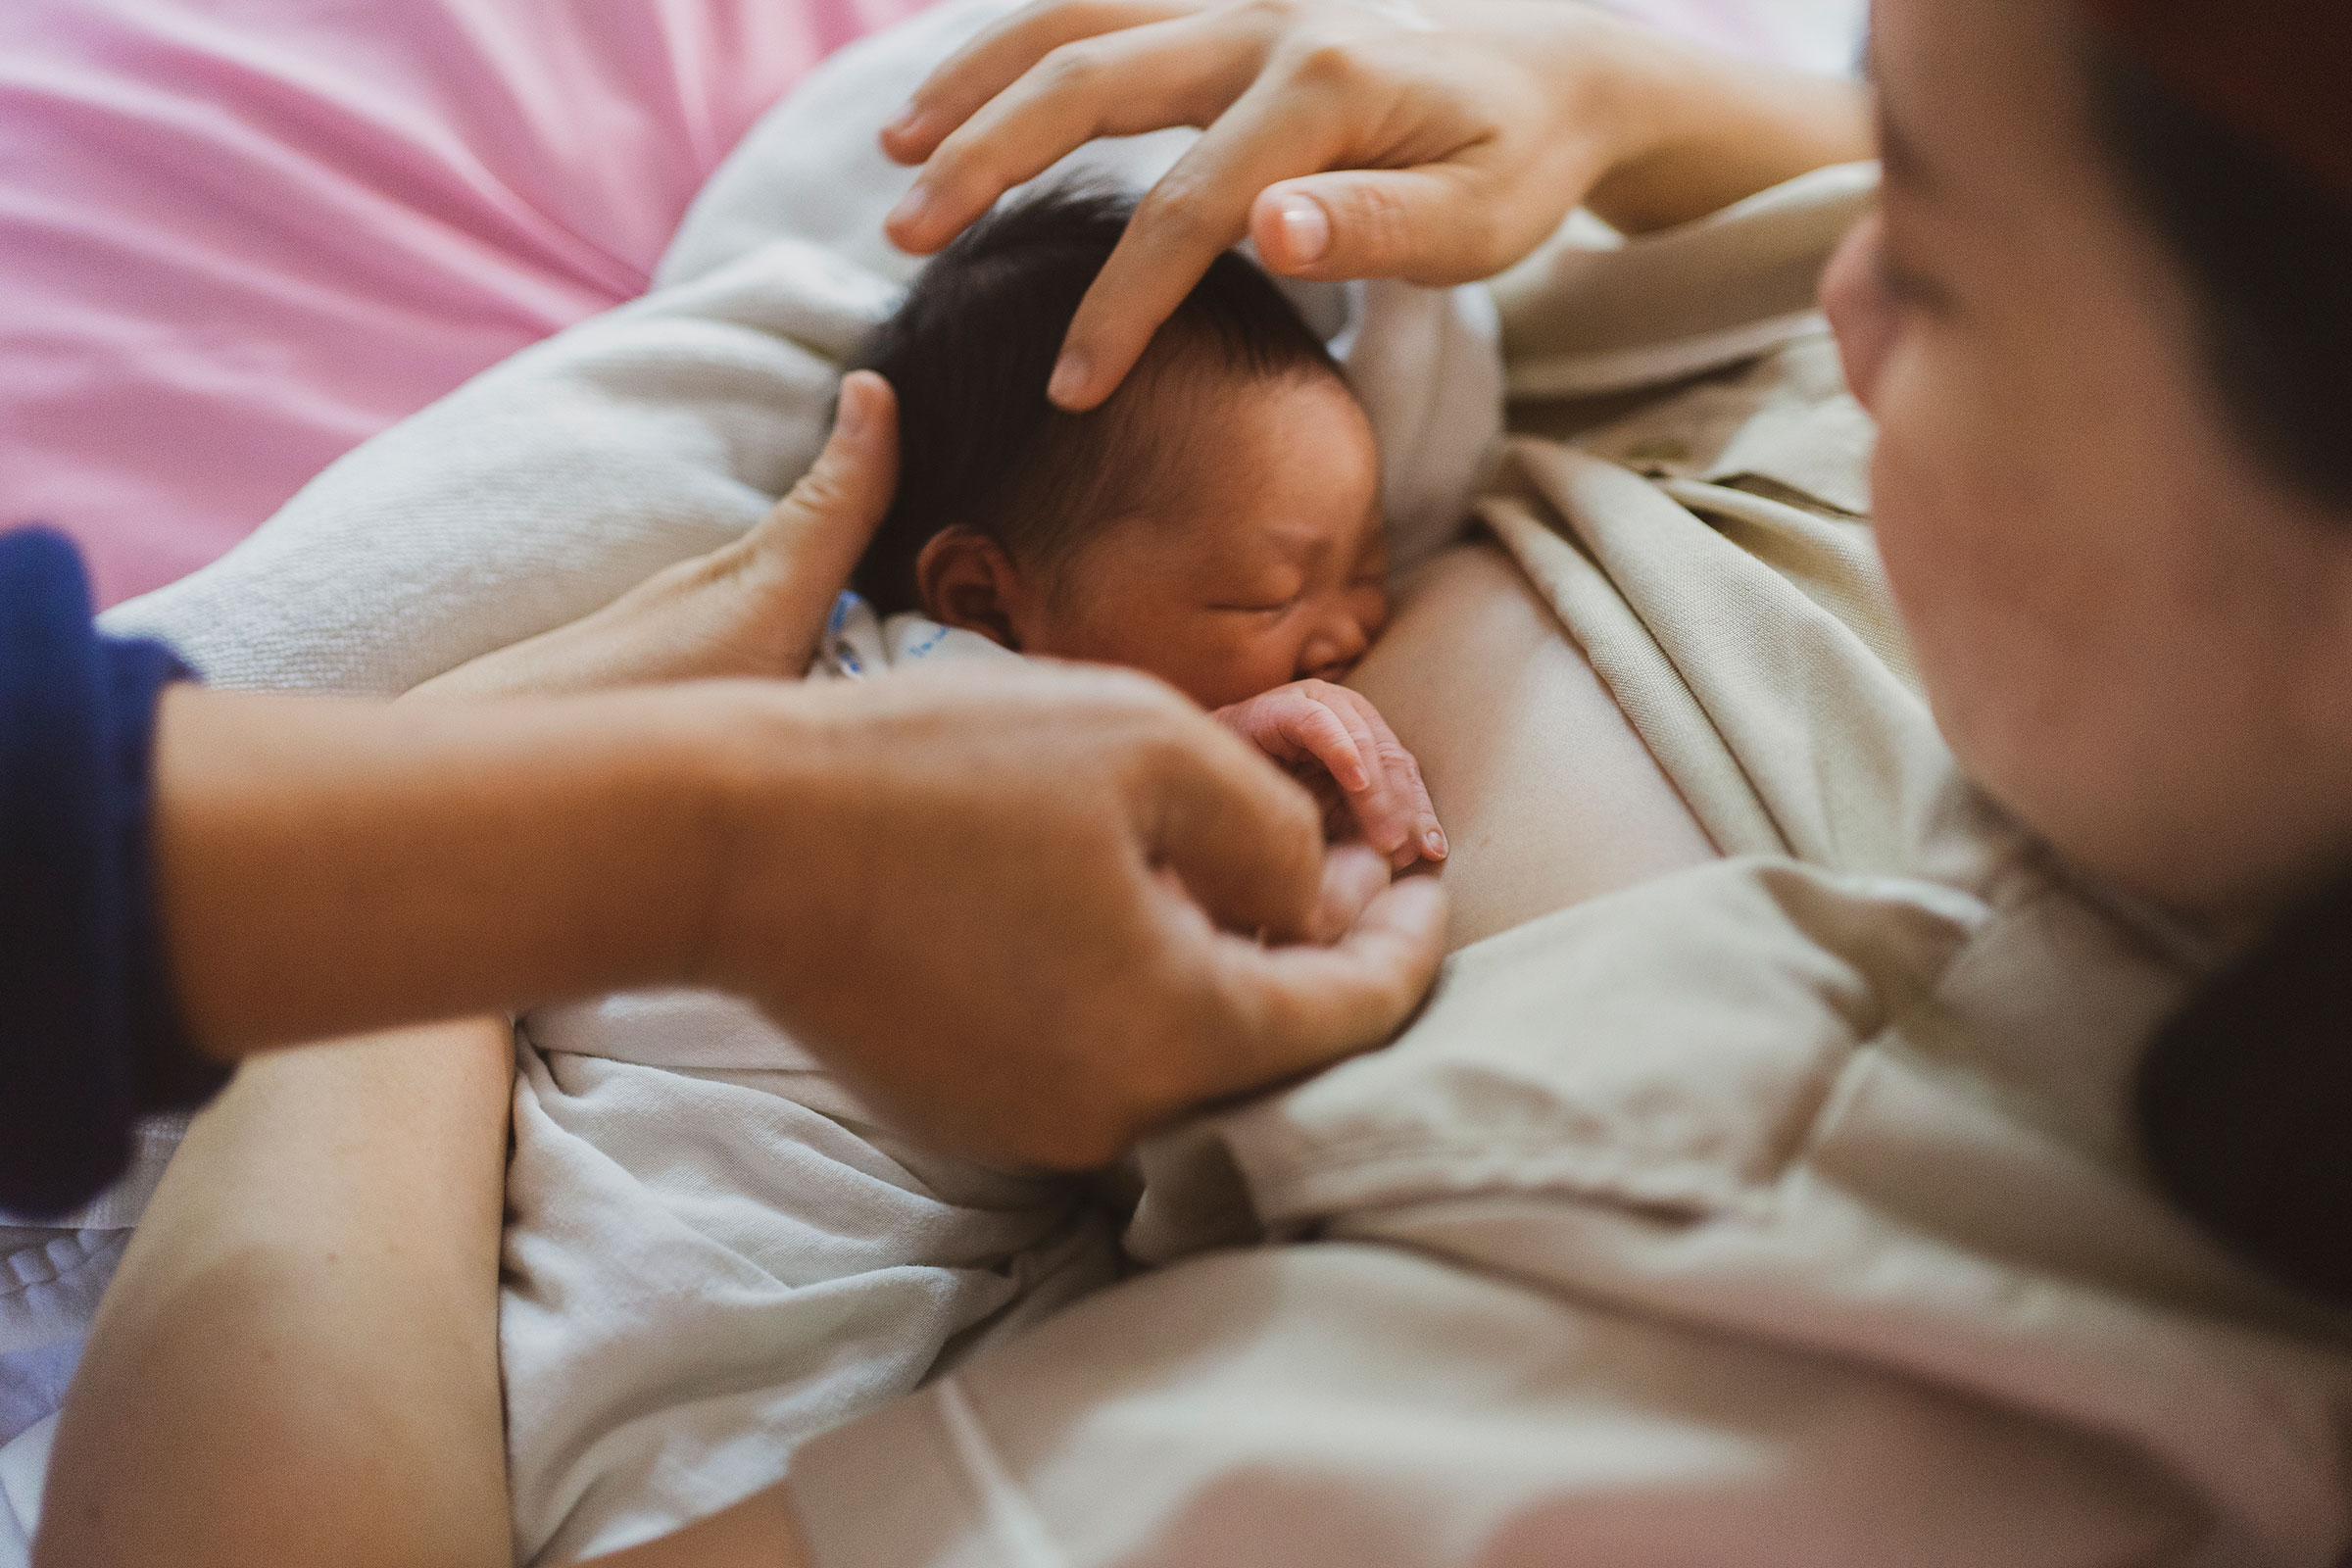 The United States is the only industrialized nation that doesn’t guarantee paid leave of any kind, yet seventy-five percent of U.S. voters  support a national paid family and medical leave policy (Getty Images)